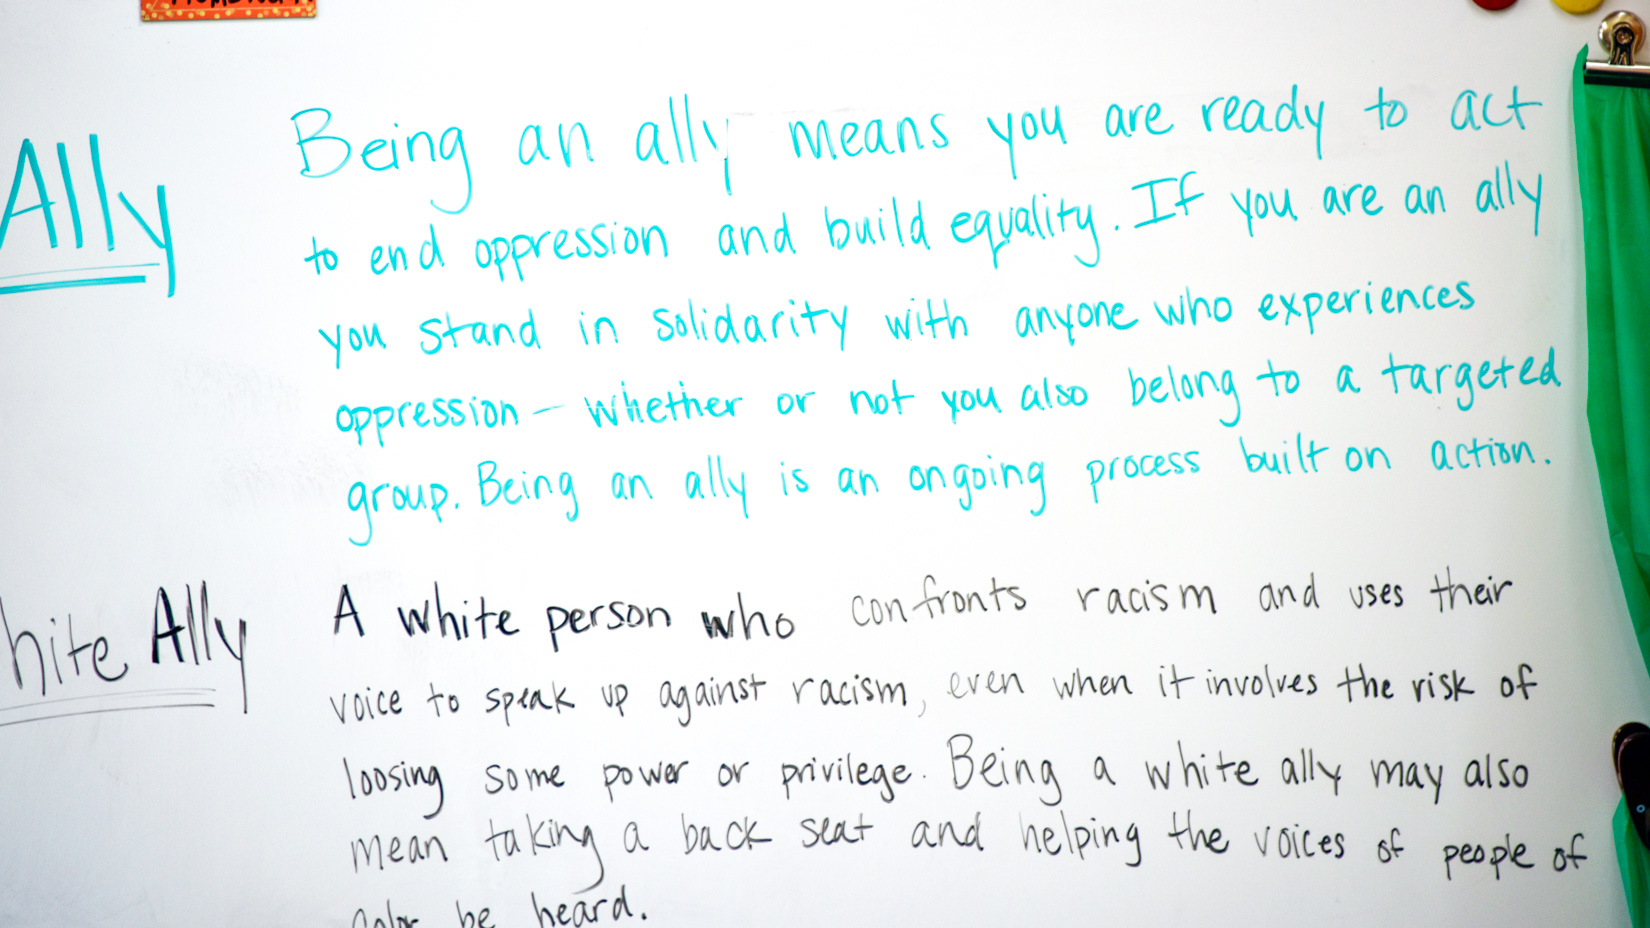 A whiteboard describing the definitions of allyship and white allyship.